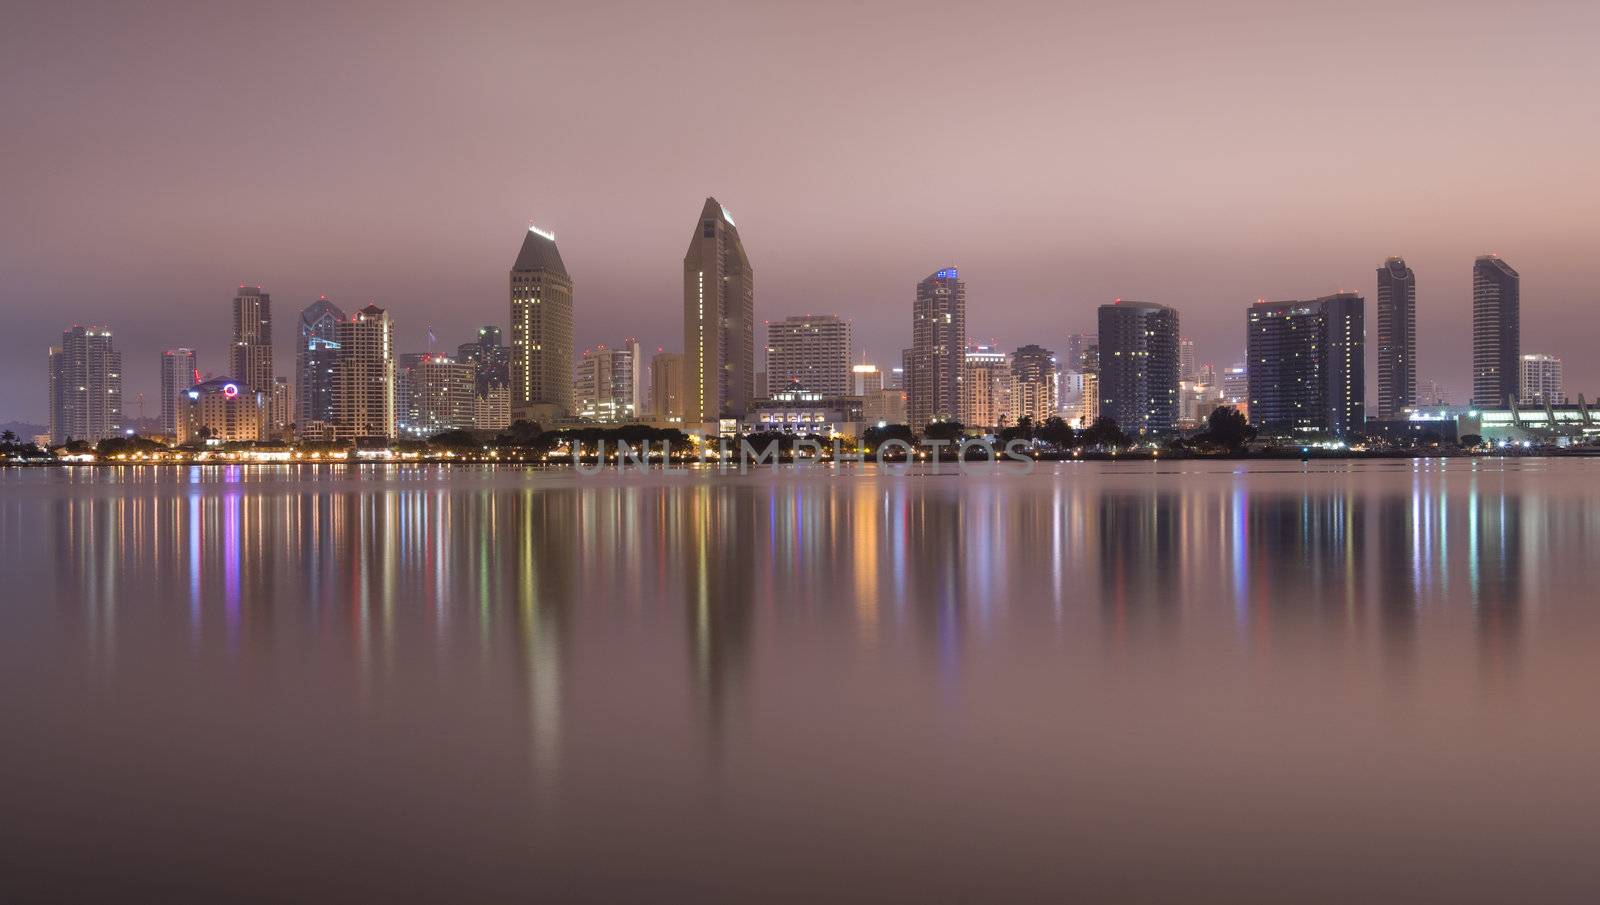 San Diego Midnight by ChrisBoswell